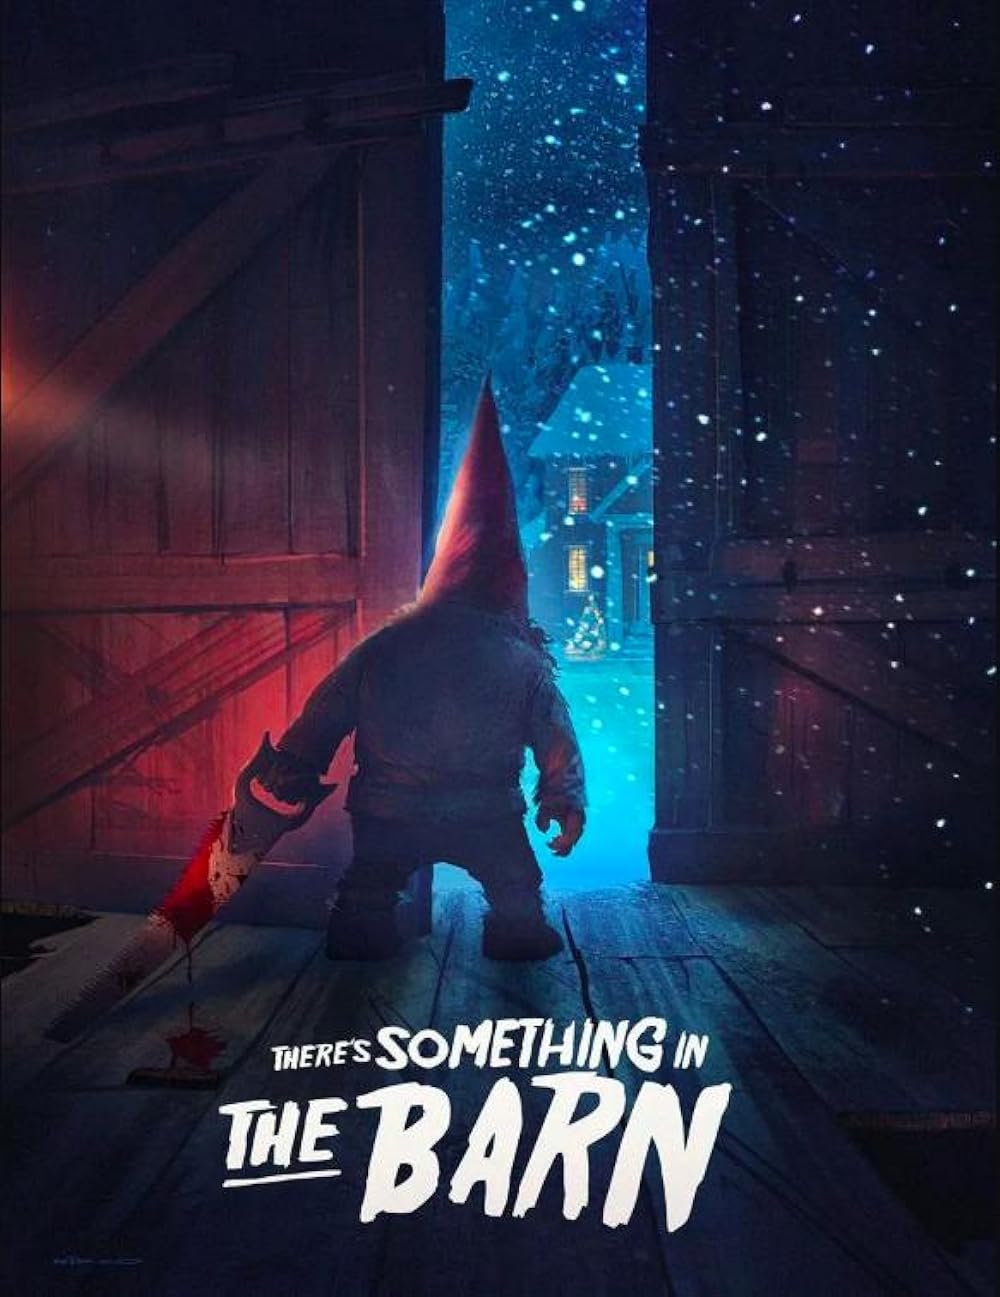 There Is Somethign in the Barn Teaser & Poster 